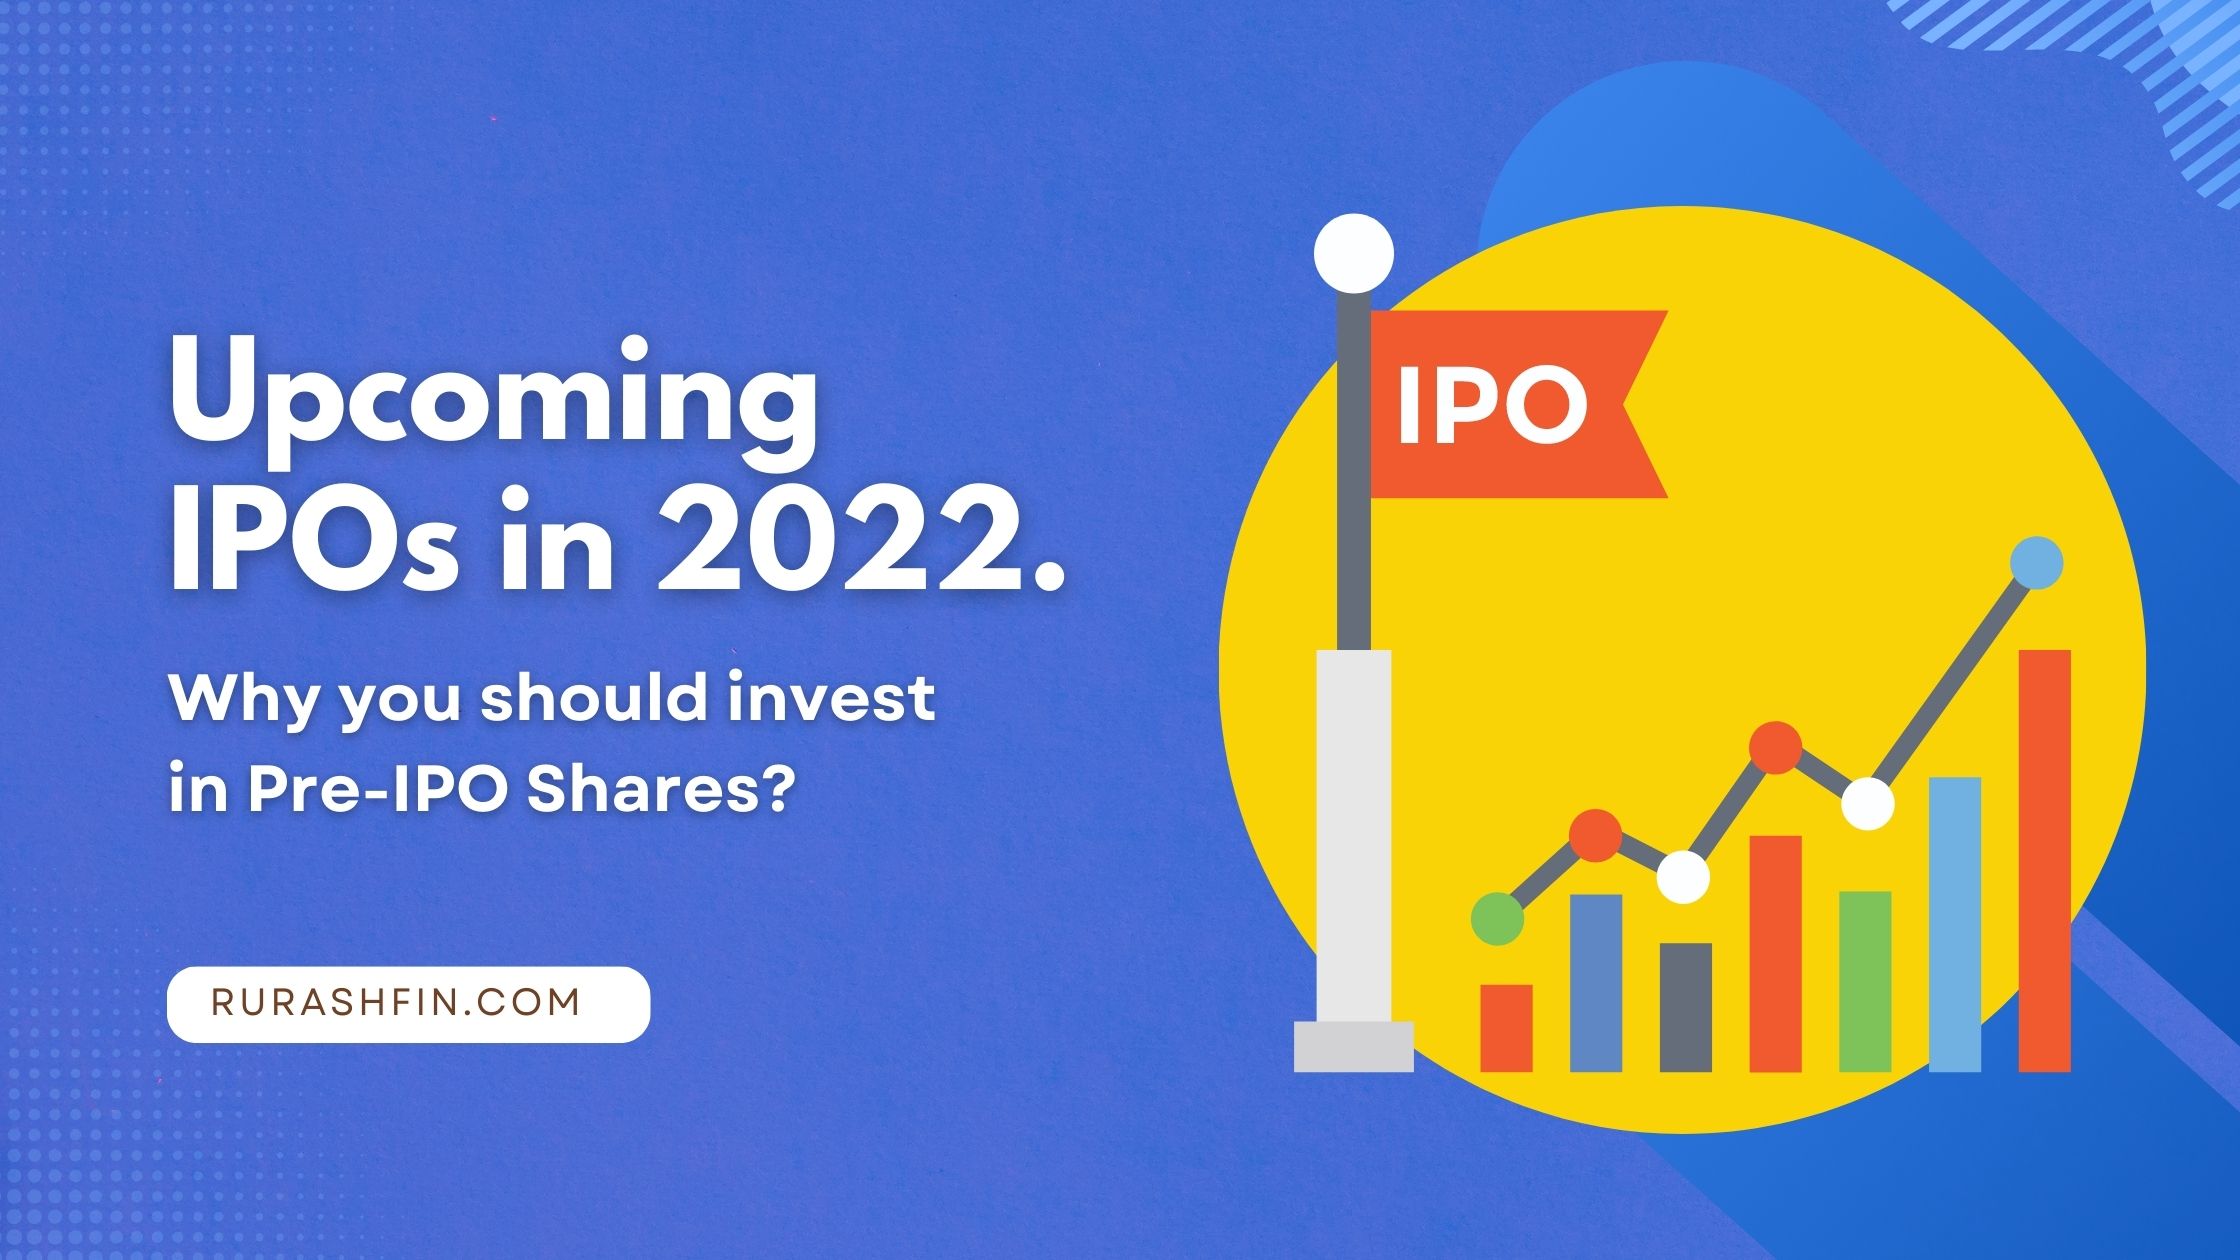 IPOs in 2022, and Why you should invest in PreIPO Shares